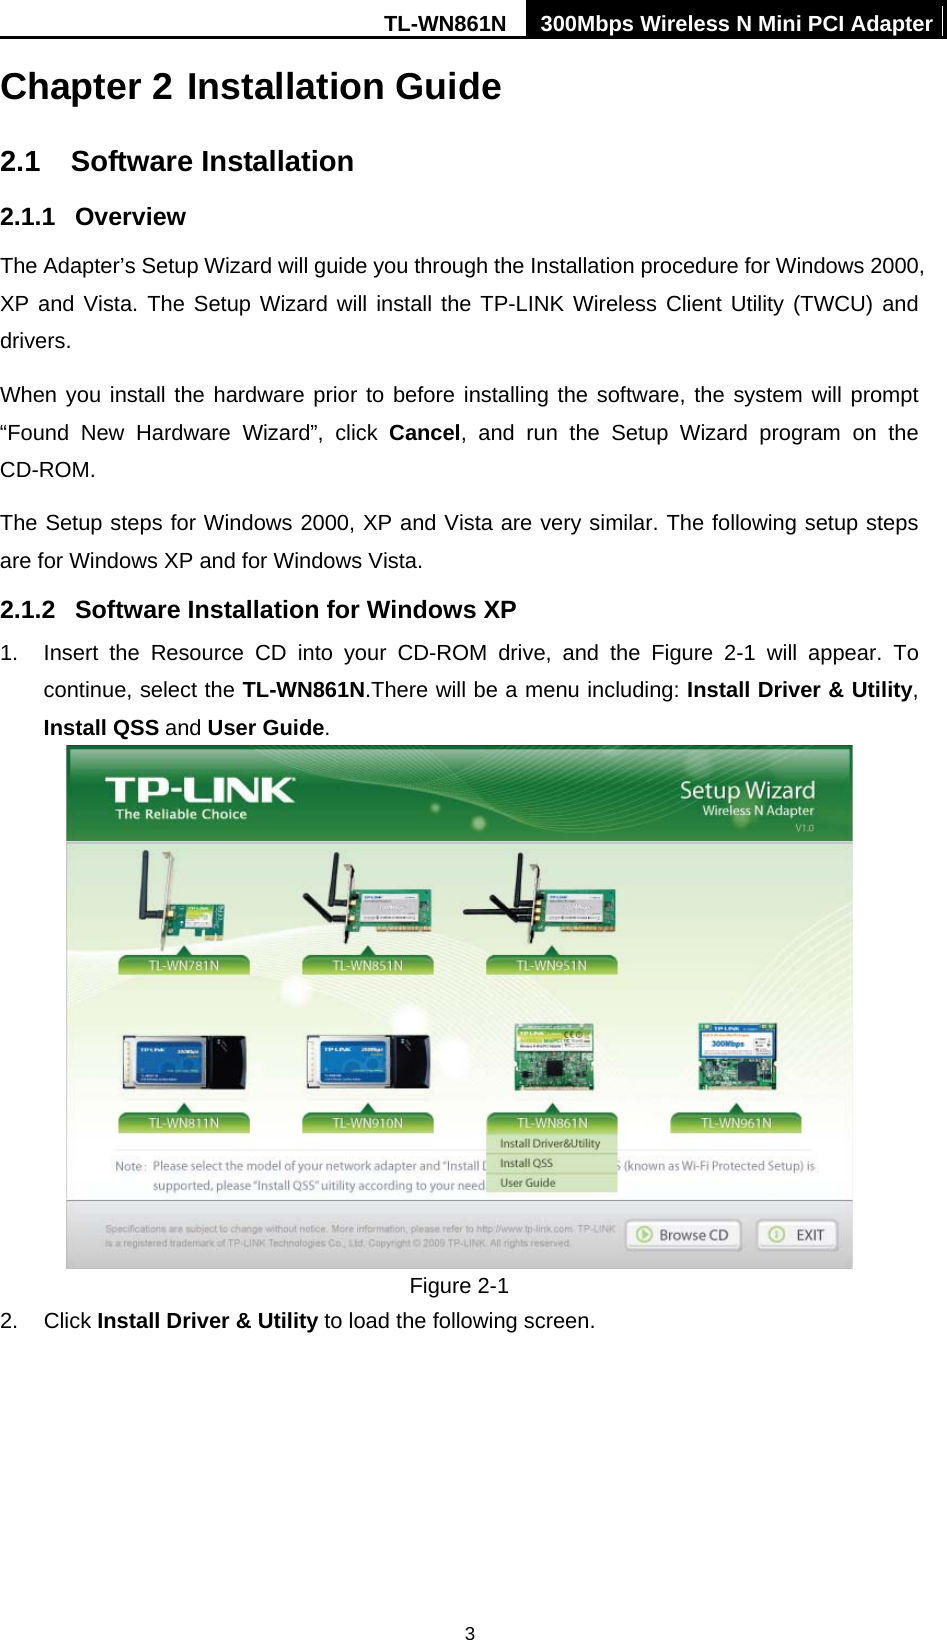 TL-WN861N  300Mbps Wireless N Mini PCI Adapter  3Chapter 2 Installation Guide 2.1  Software Installation 2.1.1  Overview The Adapter’s Setup Wizard will guide you through the Installation procedure for Windows 2000, XP and Vista. The Setup Wizard will install the TP-LINK Wireless Client Utility (TWCU) and drivers. When you install the hardware prior to before installing the software, the system will prompt “Found New Hardware Wizard”, click Cancel, and run the Setup Wizard program on the CD-ROM.  The Setup steps for Windows 2000, XP and Vista are very similar. The following setup steps are for Windows XP and for Windows Vista. 2.1.2  Software Installation for Windows XP 1.  Insert the Resource CD into your CD-ROM drive, and the Figure 2-1 will appear. To continue, select the TL-WN861N.There will be a menu including: Install Driver &amp; Utility, Install QSS and User Guide.  Figure 2-1 2. Click Install Driver &amp; Utility to load the following screen. 